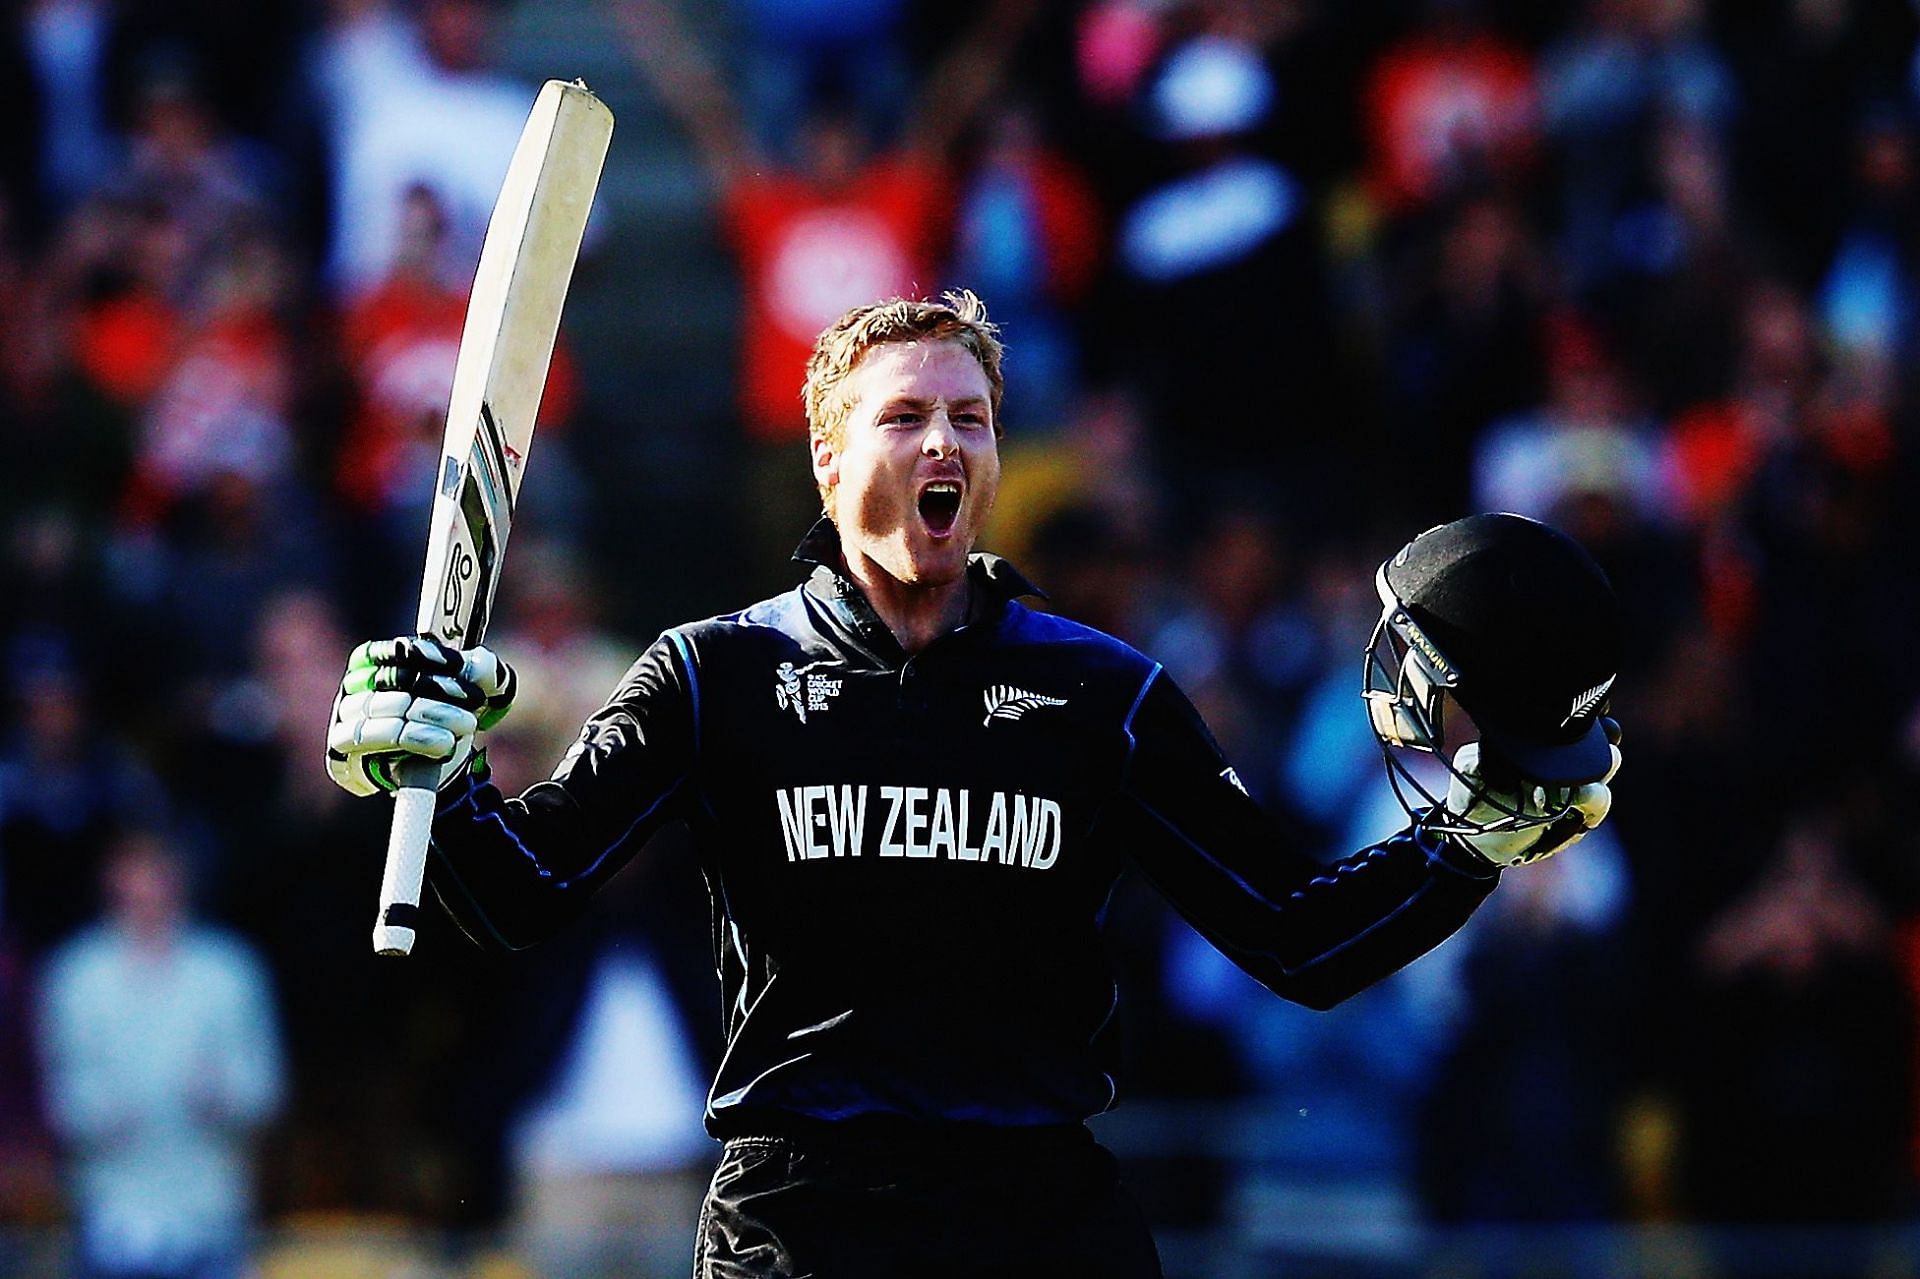 Martin Guptill celebrates after reaching 200 against West Indies during the 2015 edition. (Pic: Getty Images)